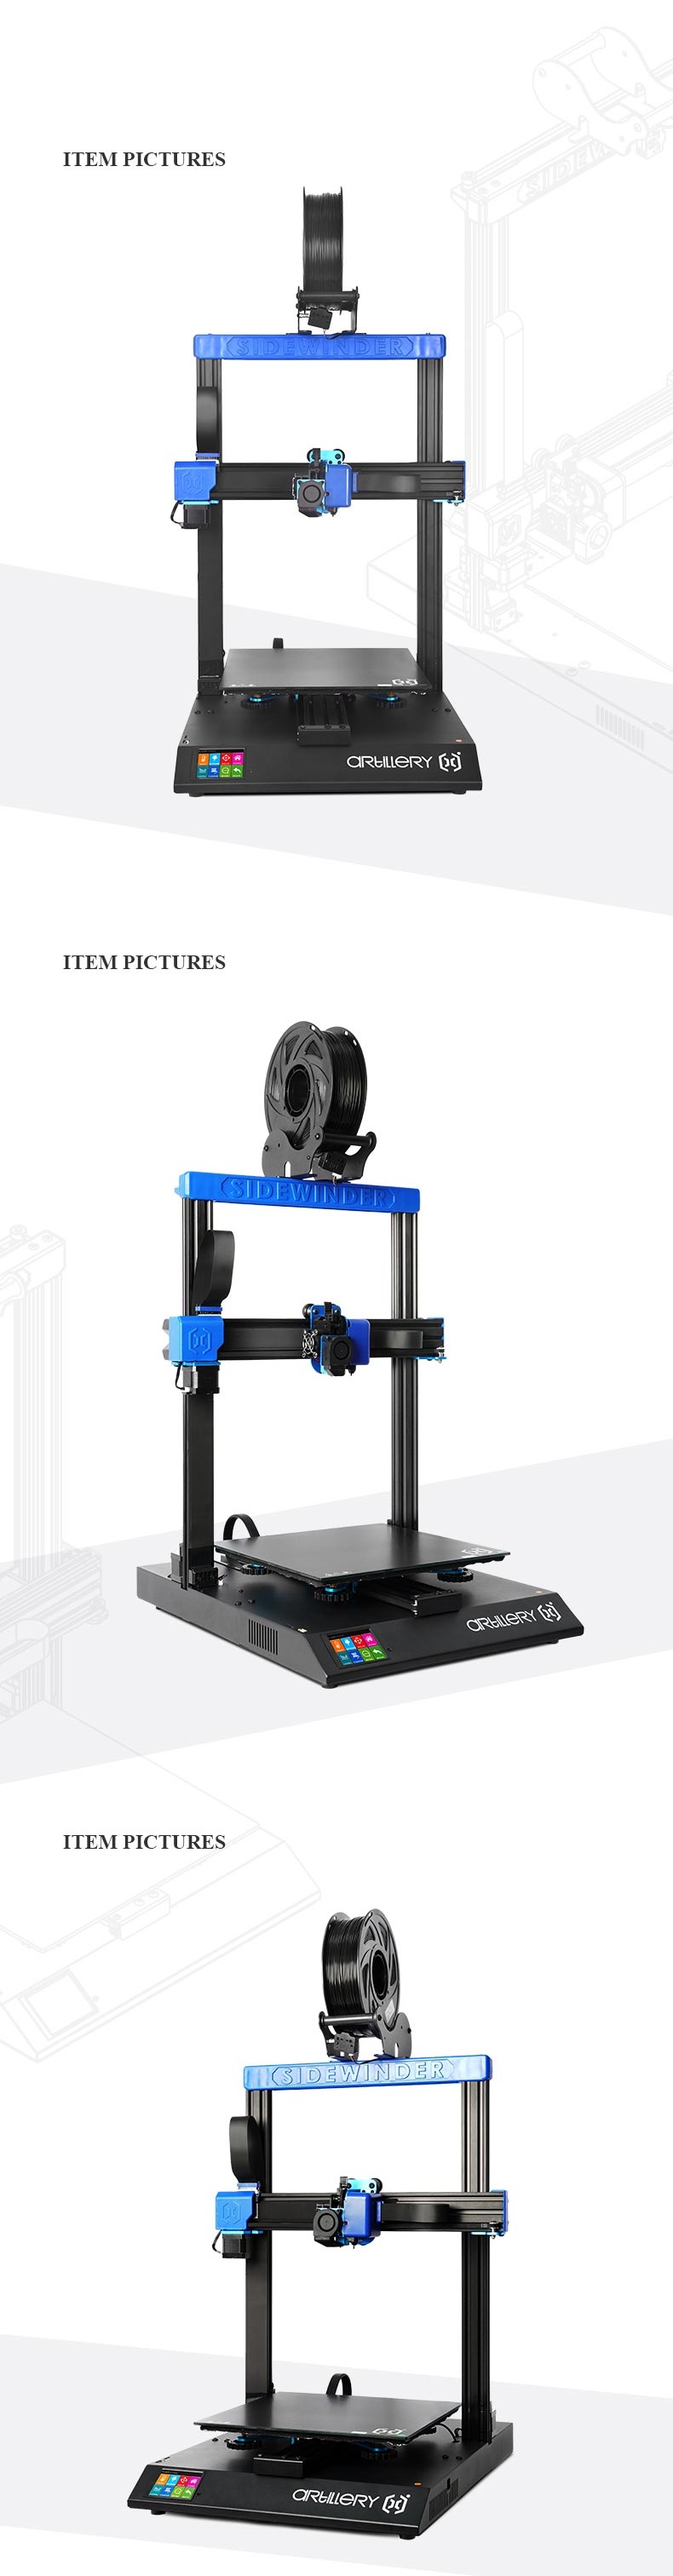 Artillery® Sidewinder X2 & Sidewinder X1 3D Printer Kit with 300*300*400mm Large Print Size Support Resume Printing&Filament Runout Detection With Dual Z axis/TFT Touch Screen